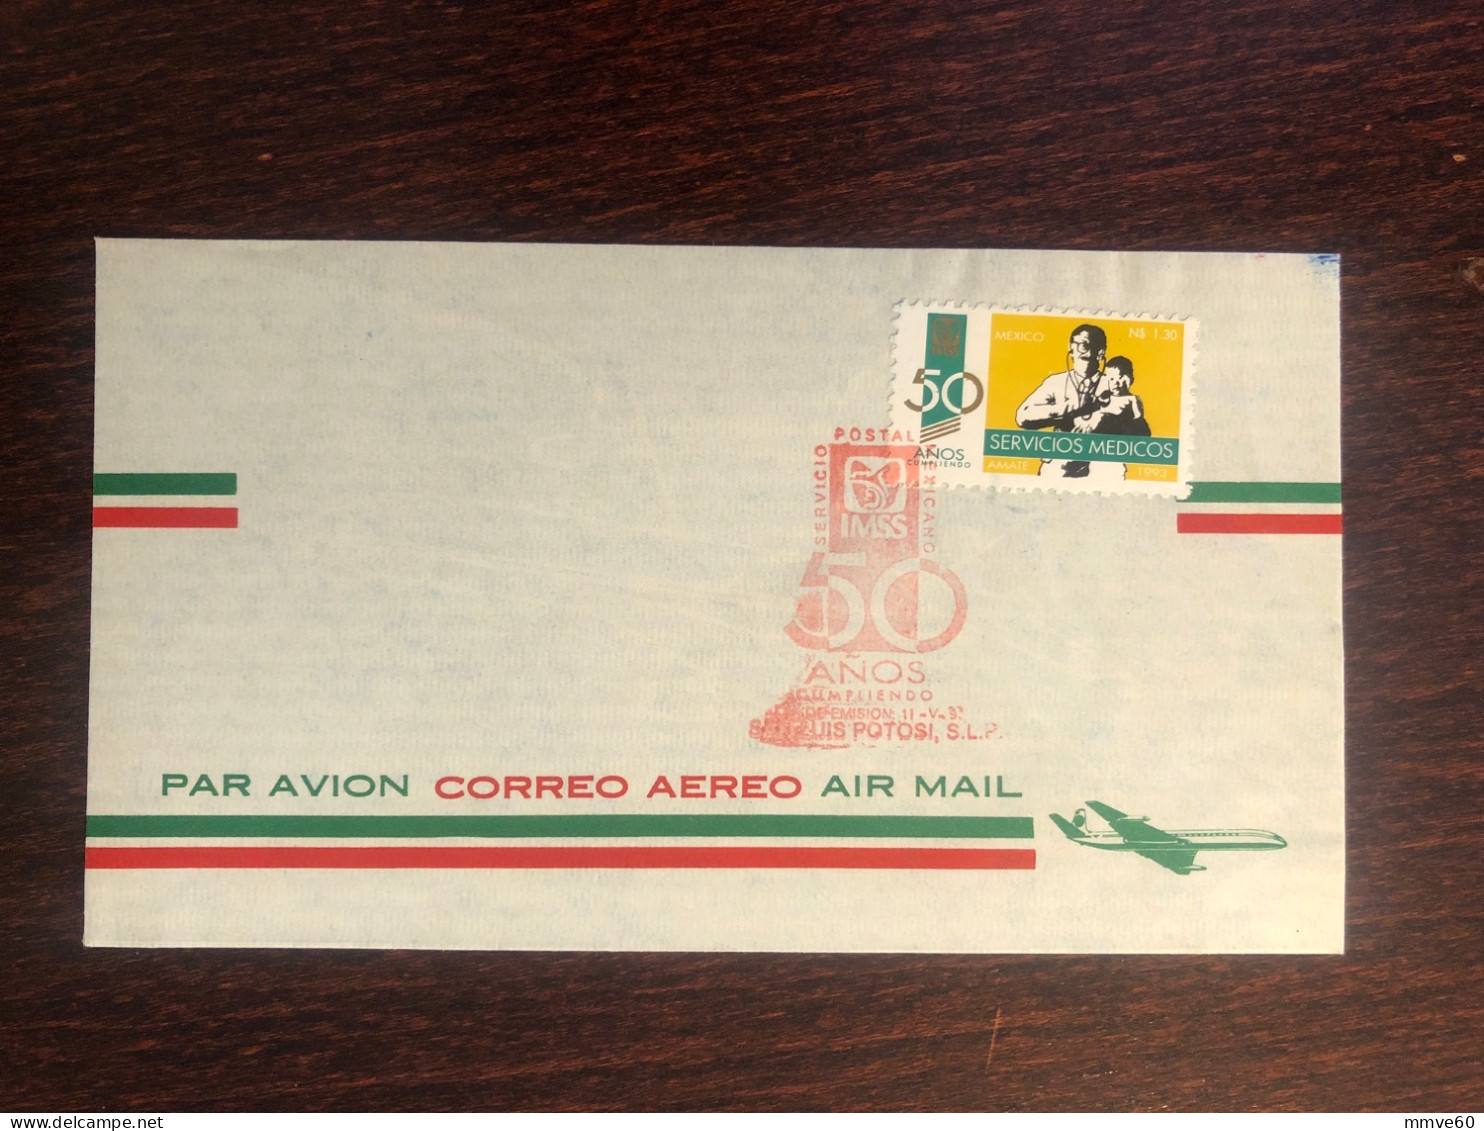 MEXICO FDC  COVER 1993 YEAR  MEDICAL SERVICES HEALTH MEDICINE STAMPS - Mexiko